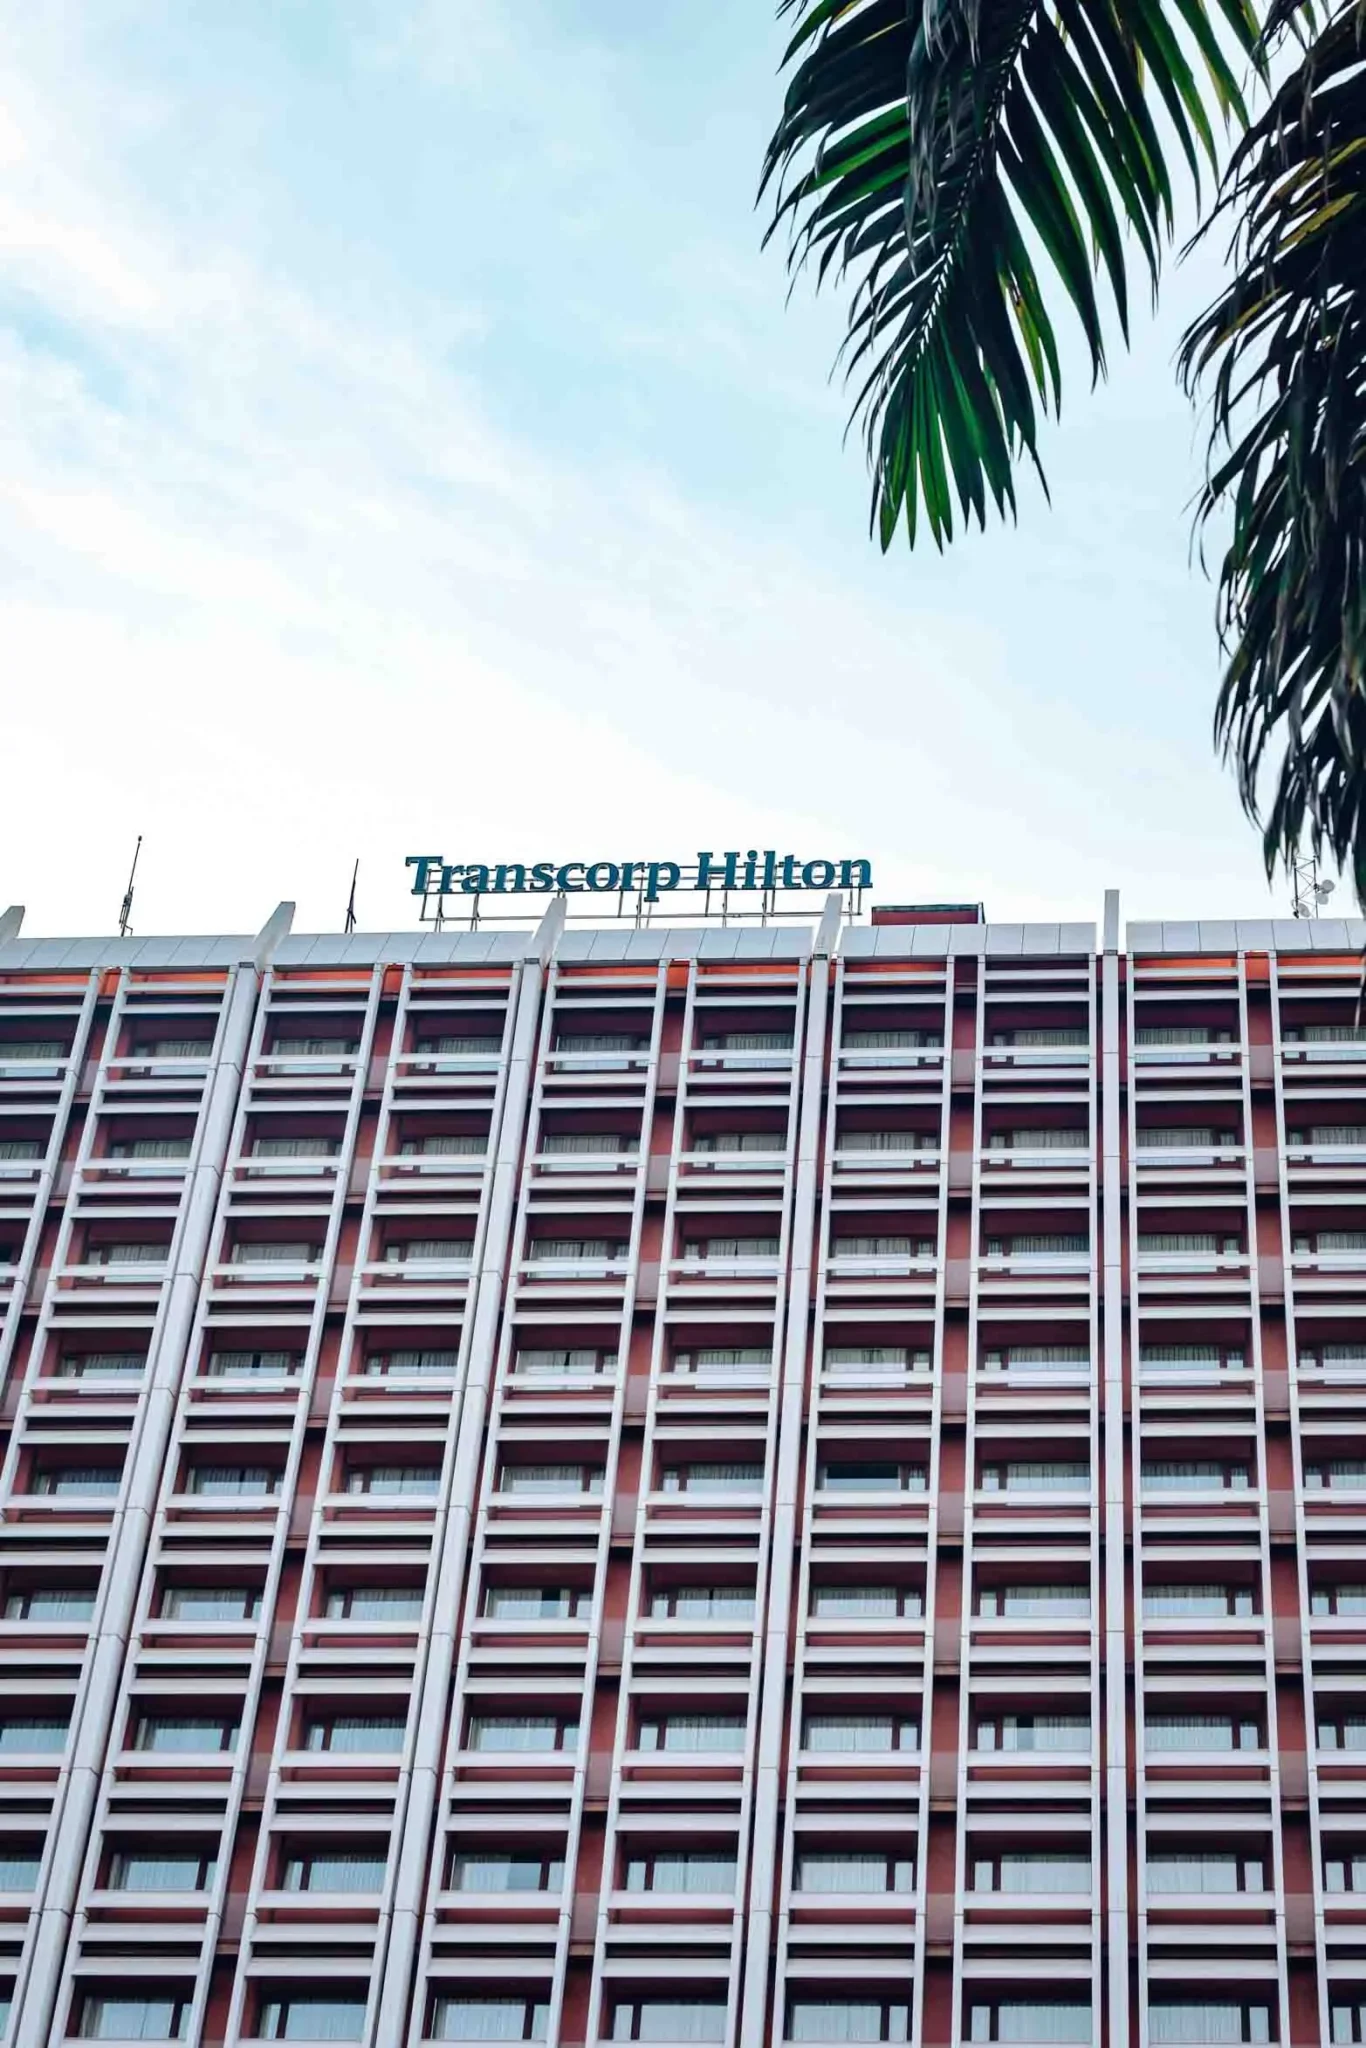 Transcorp Hotel Plc Makes History with N1 Trillion Market Cap